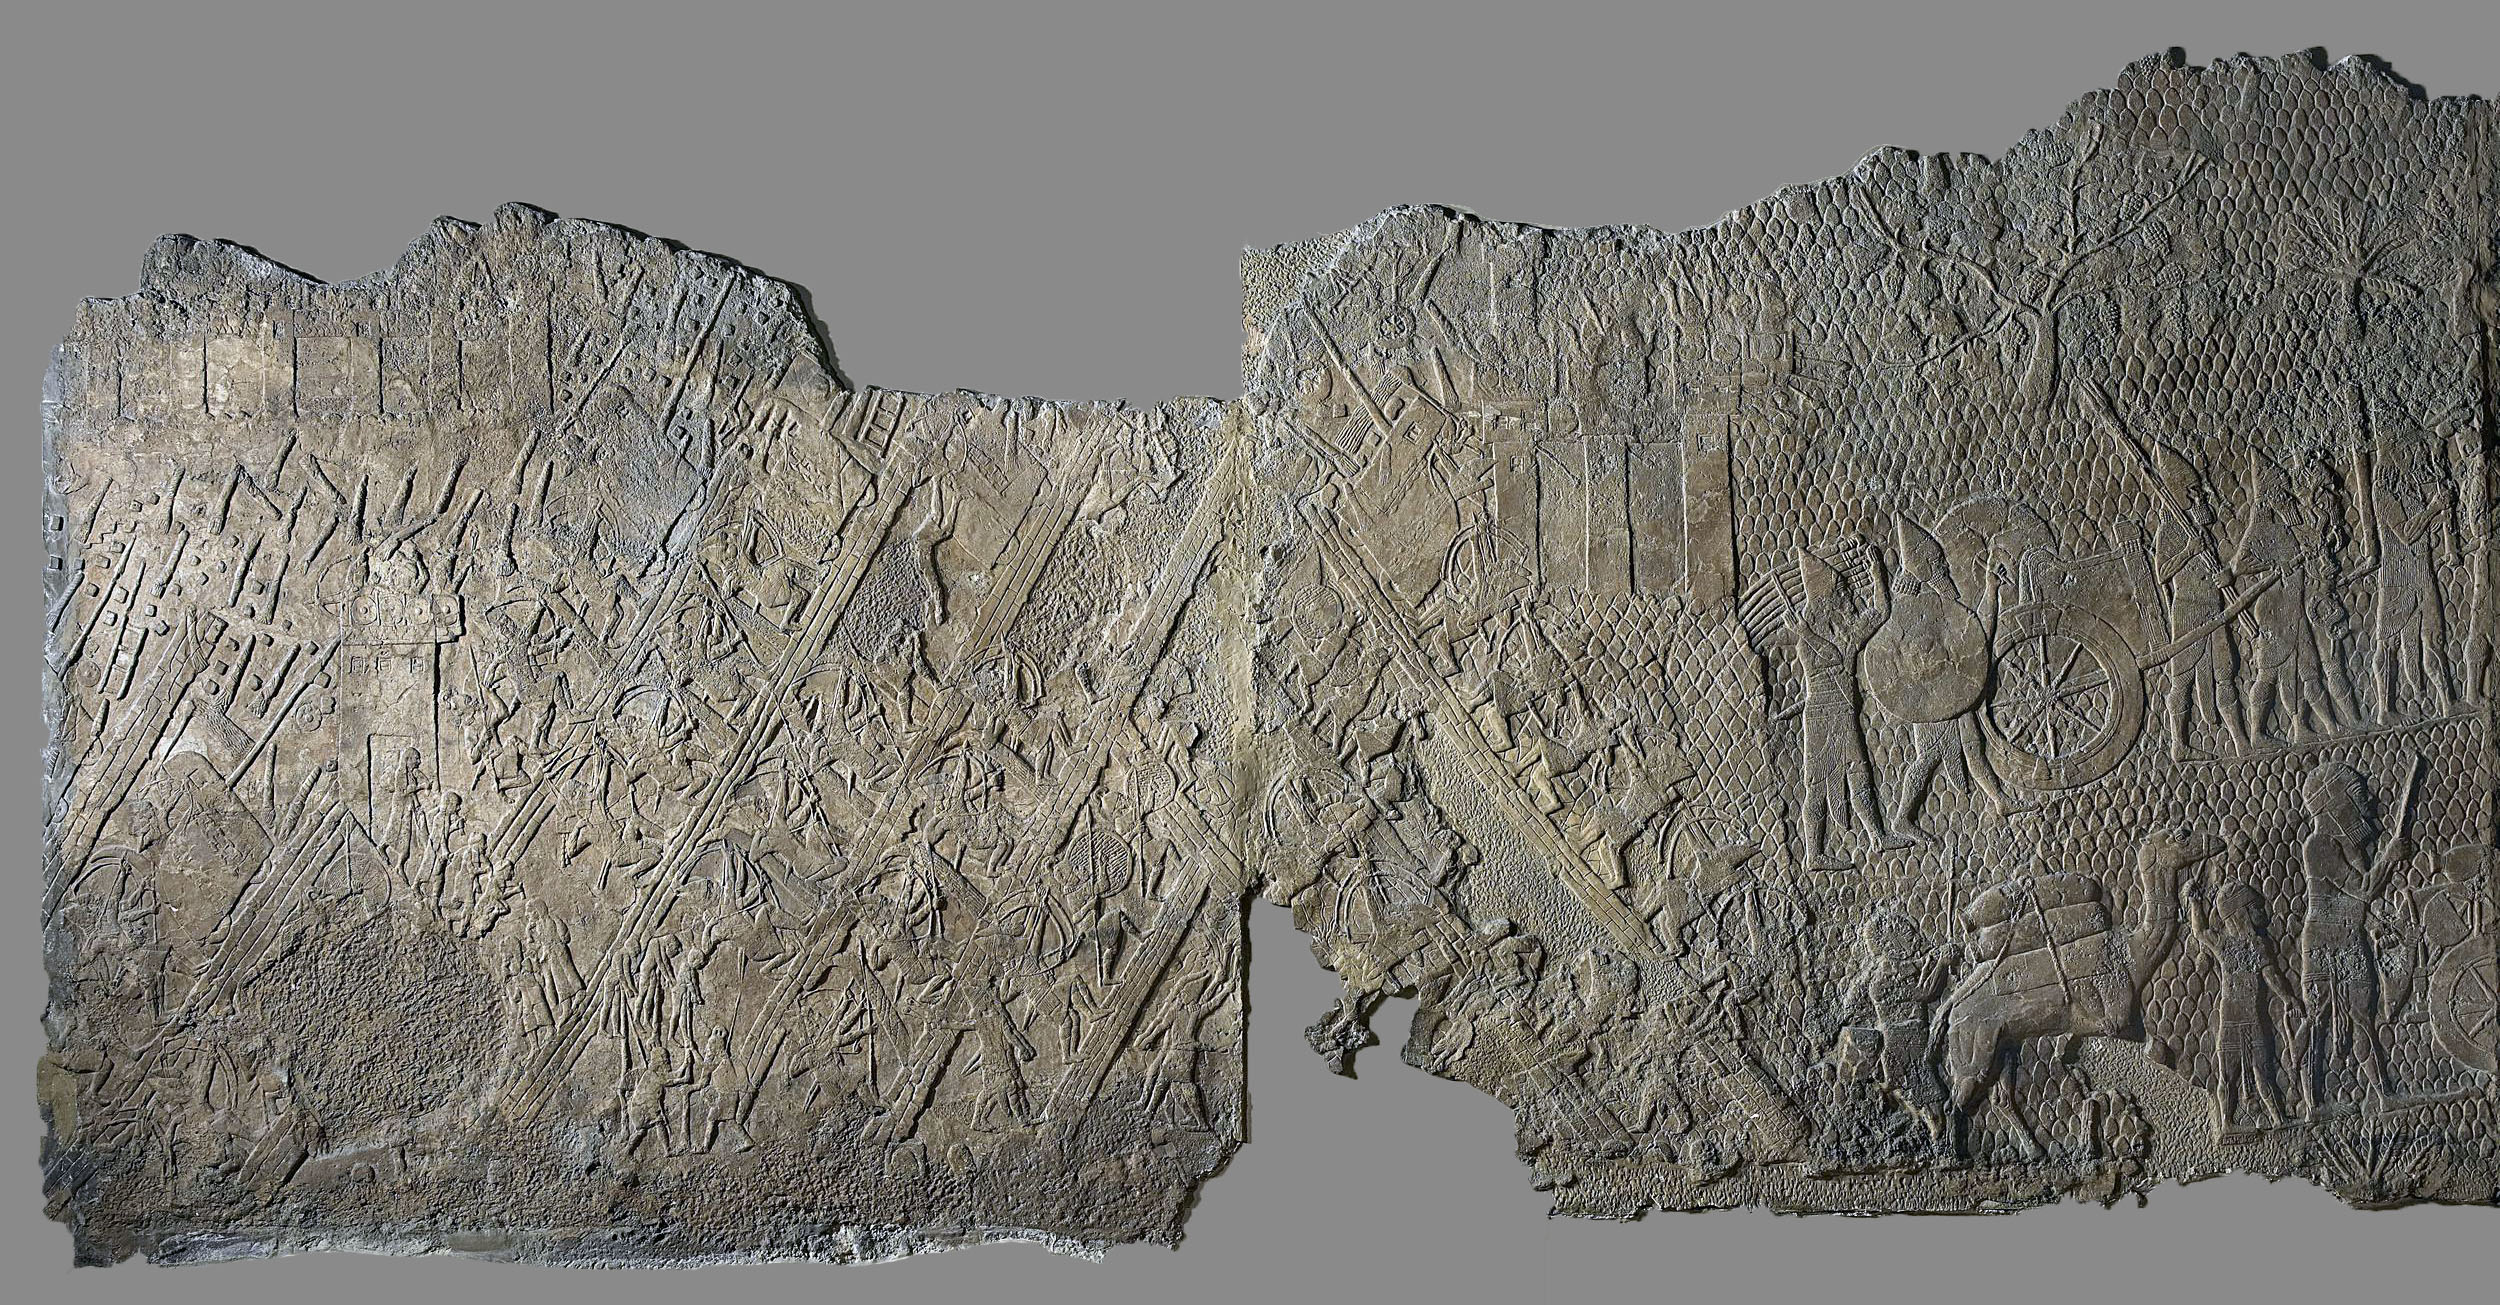 Part of a series which decorated the walls of a room in the palace of King Sennacherib (reigned 704-681 B.C.E.). The Assyrian soldiers continue the attack on Lachish. They carry away a throne, a chariot and other goods from the palace of the governor of the city. In front and below them some of the people of Lachish, carrying what goods they can salvage, move through a rocky landscape studded with vines, fig and perhaps olive trees. Sennacherib records that as a result of the whole campaign he deported 200,150 people. This was standard Assyrian policy, and was adopted by the Babylonians, the next ruling empire. The Siege and Capture of the City of Lachish in 701 B.C.E., South-West Palace of Sennacherib, Nineveh, northern Iraq, Neo-Assyrian, c. 700-681 B.C.E., alabaster, 182.880 x 193.040 cm (The British Museum)